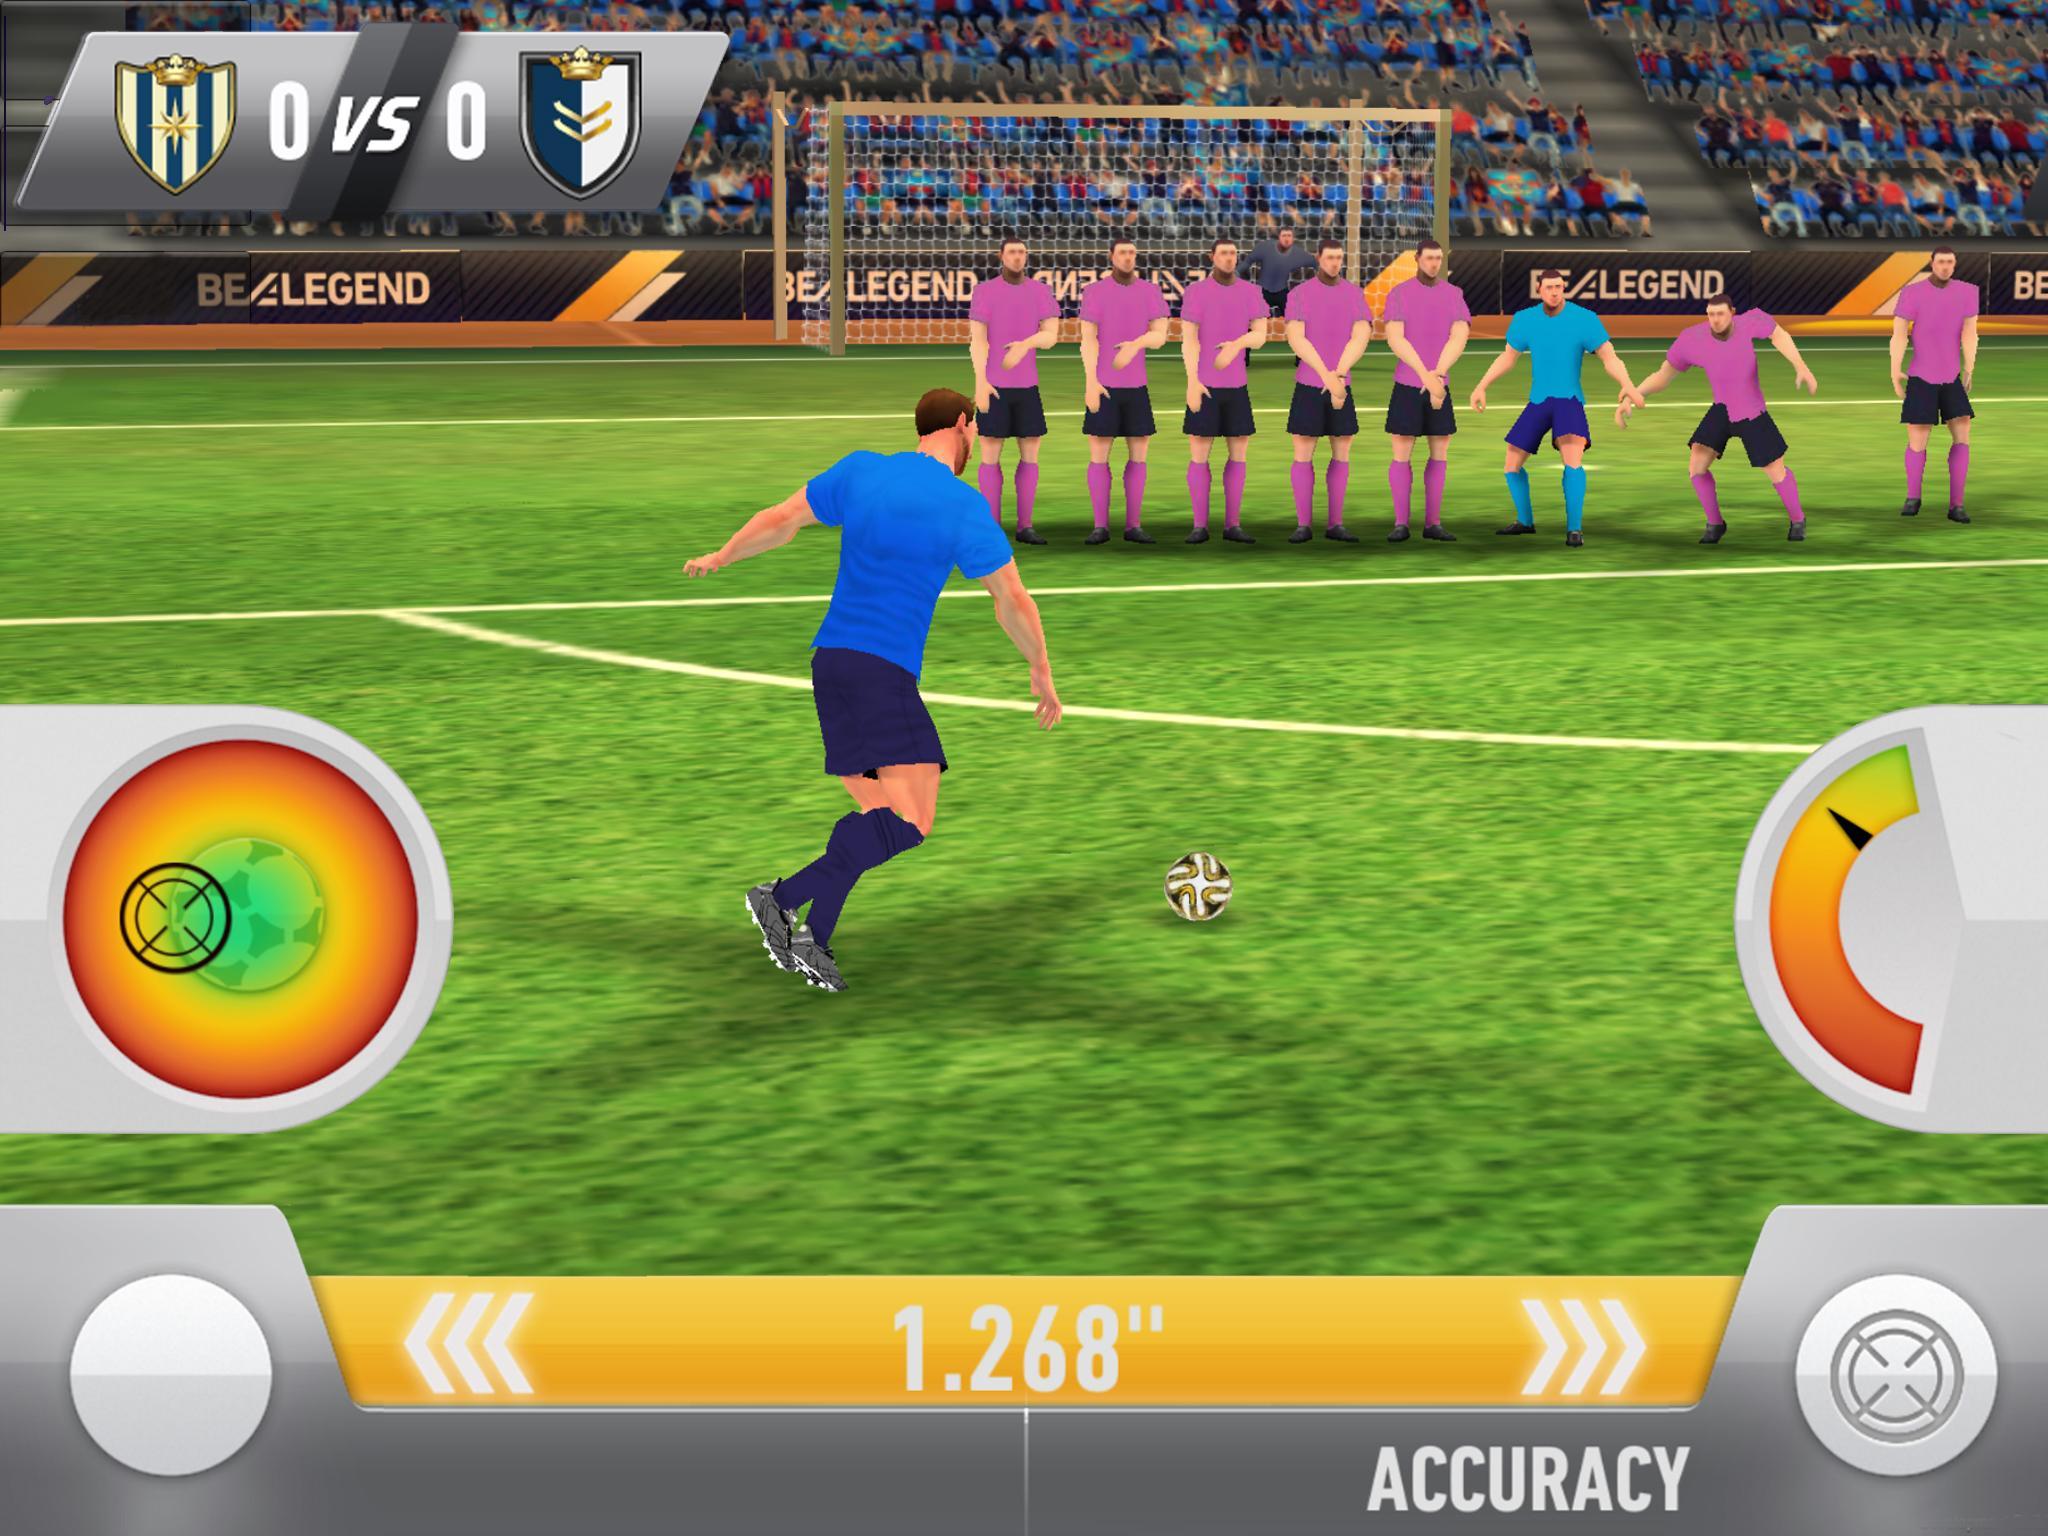 Be A Legend: Real Soccer Champions Game 2.9.8 Screenshot 17